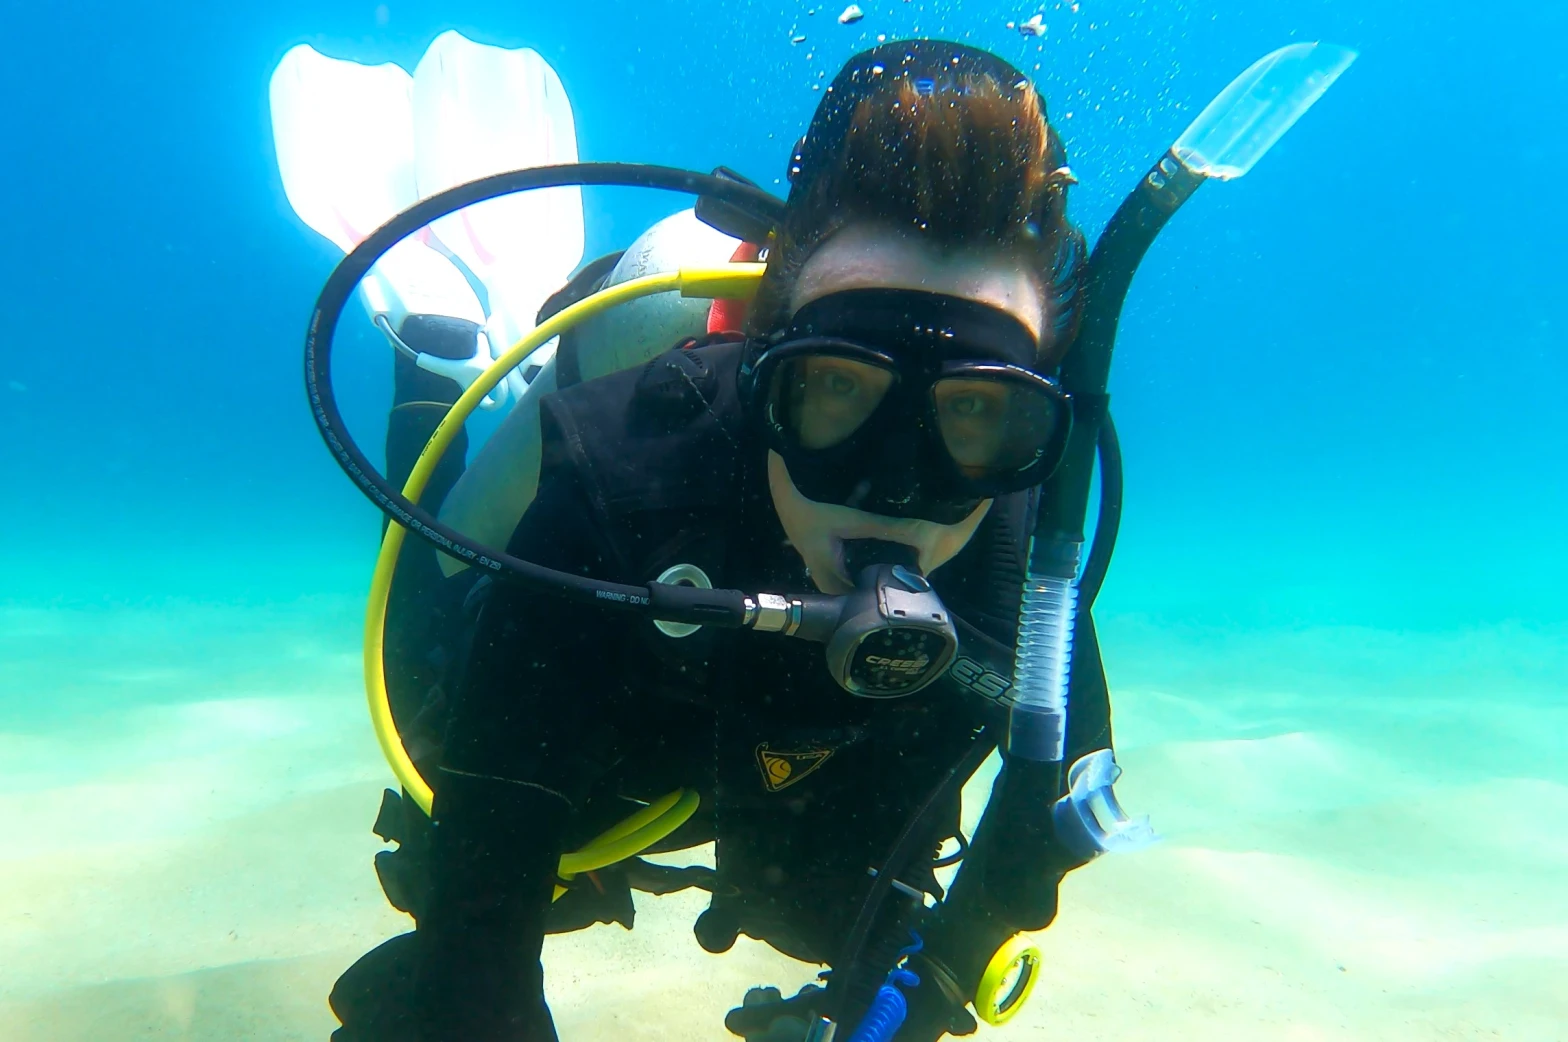 10 Essential Safety Rules to Become a Confident Scuba Diver – A